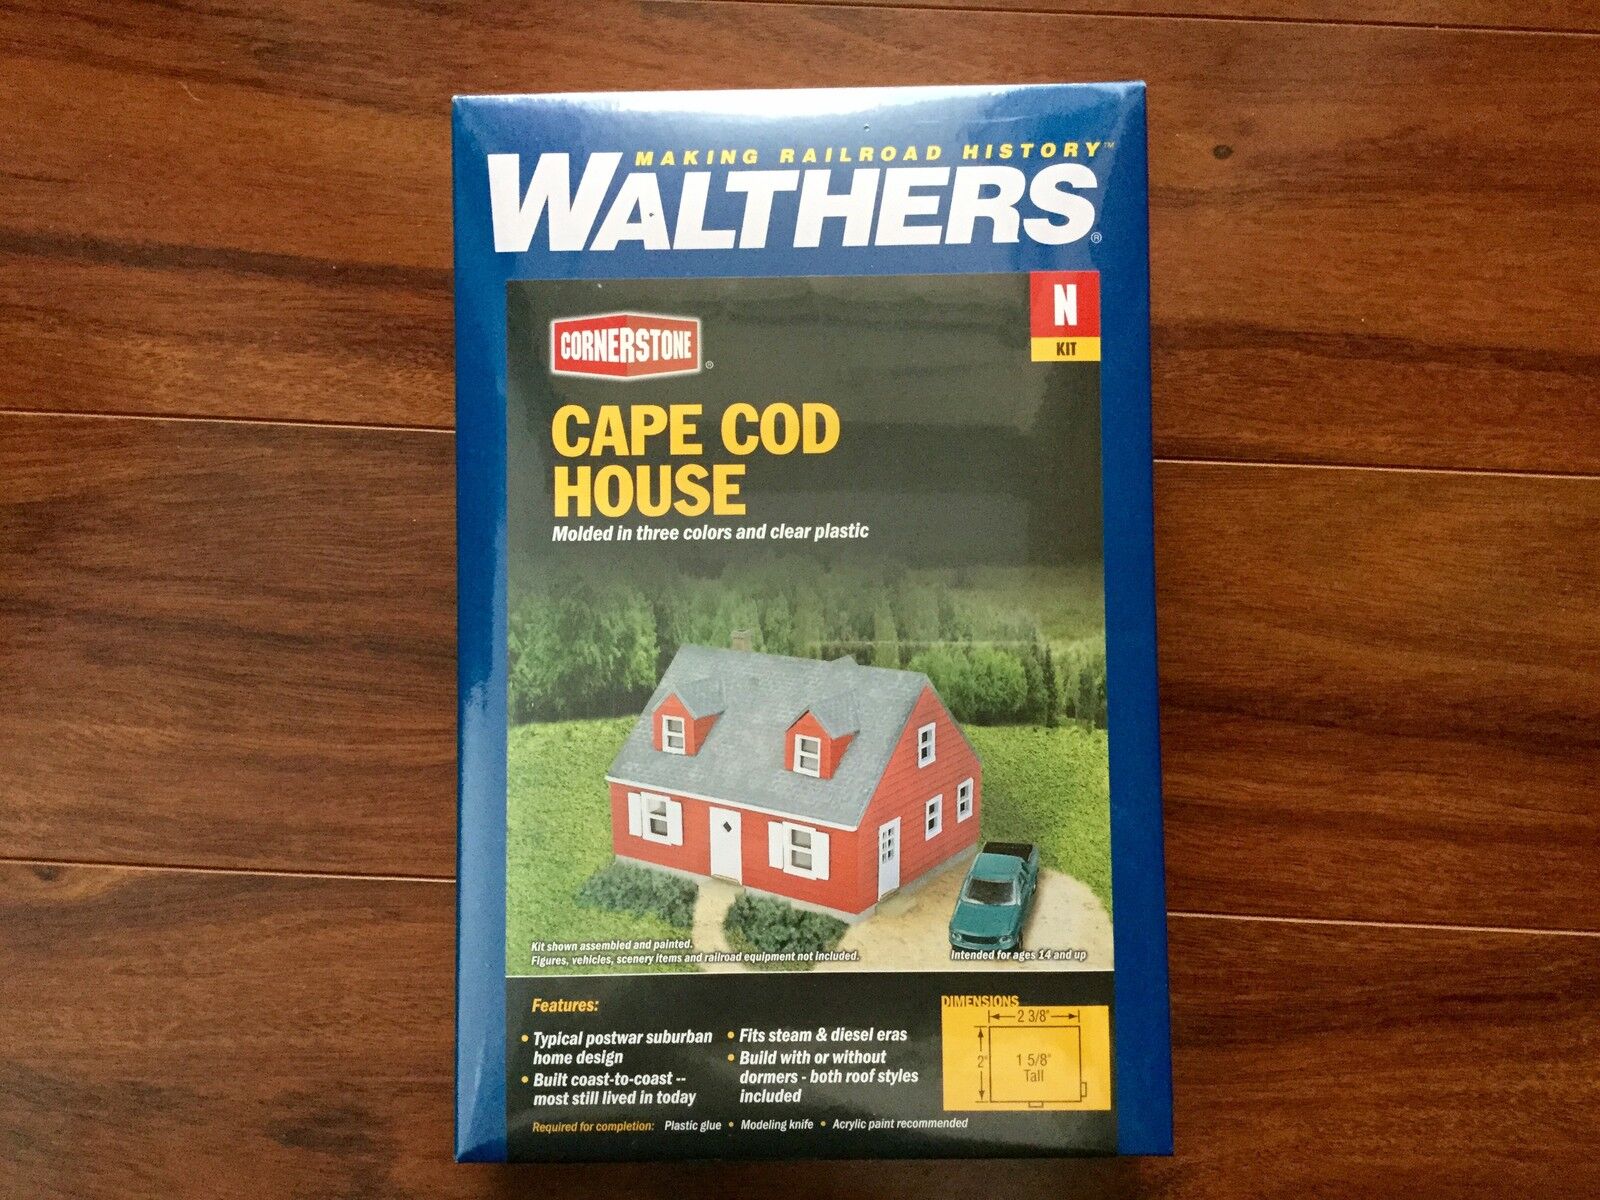 WALTHERS 1/160 N SCALE CORNERSTONE CAPE COD HOUSE MODEL KIT ITEM # 933-3839 F/S